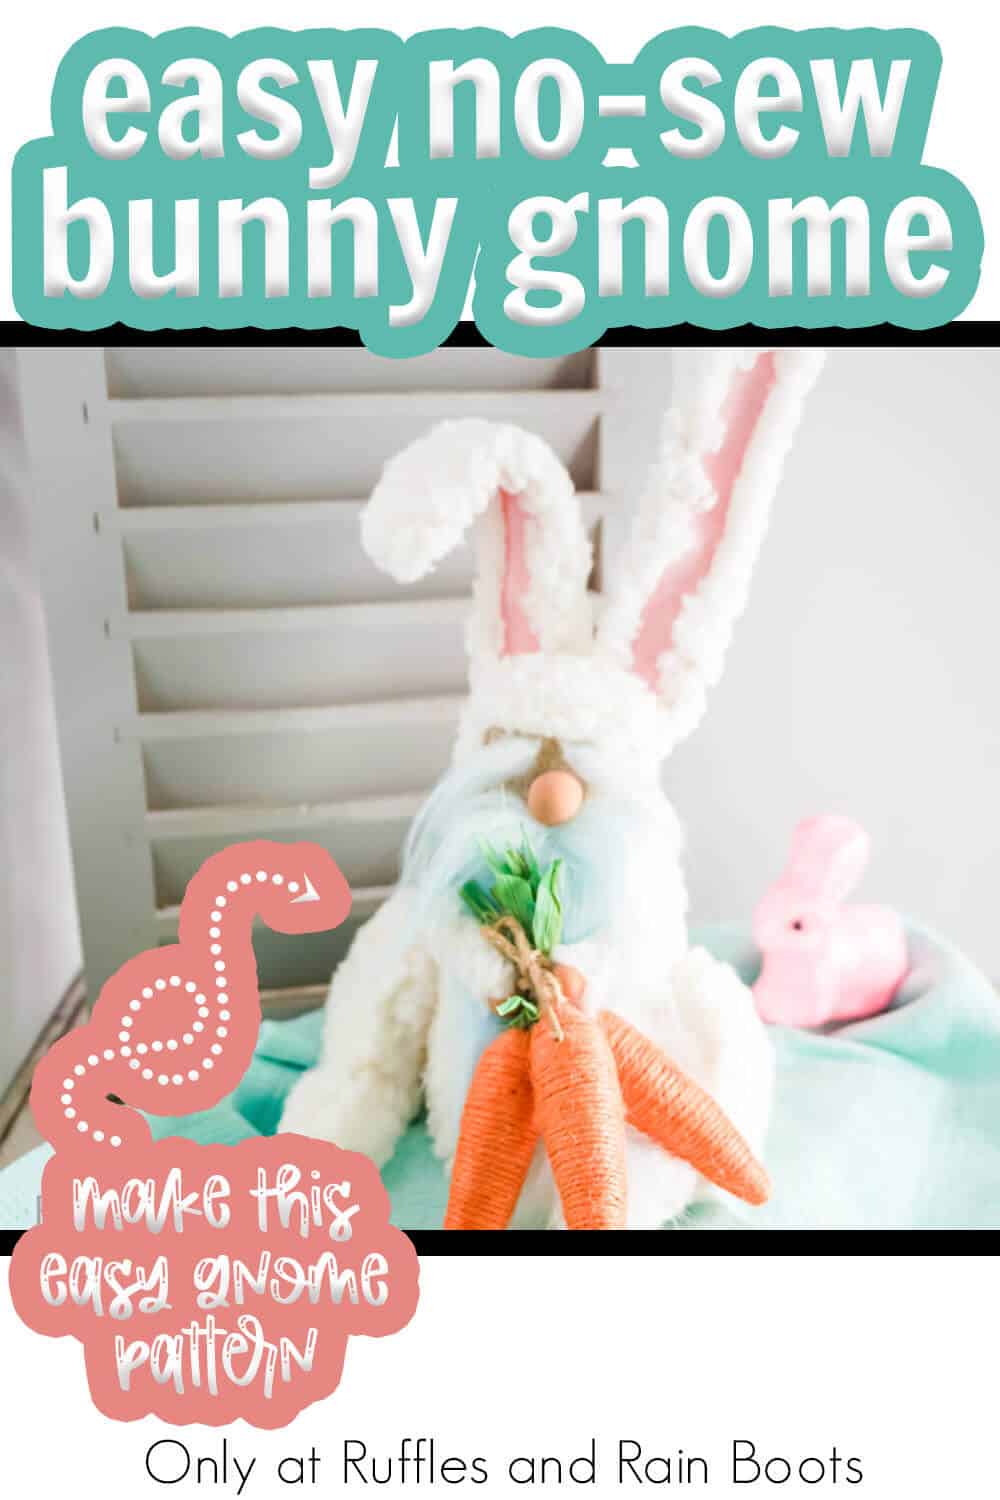 A gnome in a bunny suit Easter gnome holding carrots with text which reads easy no-sew bunny gnome make this easy no-sew pattern.